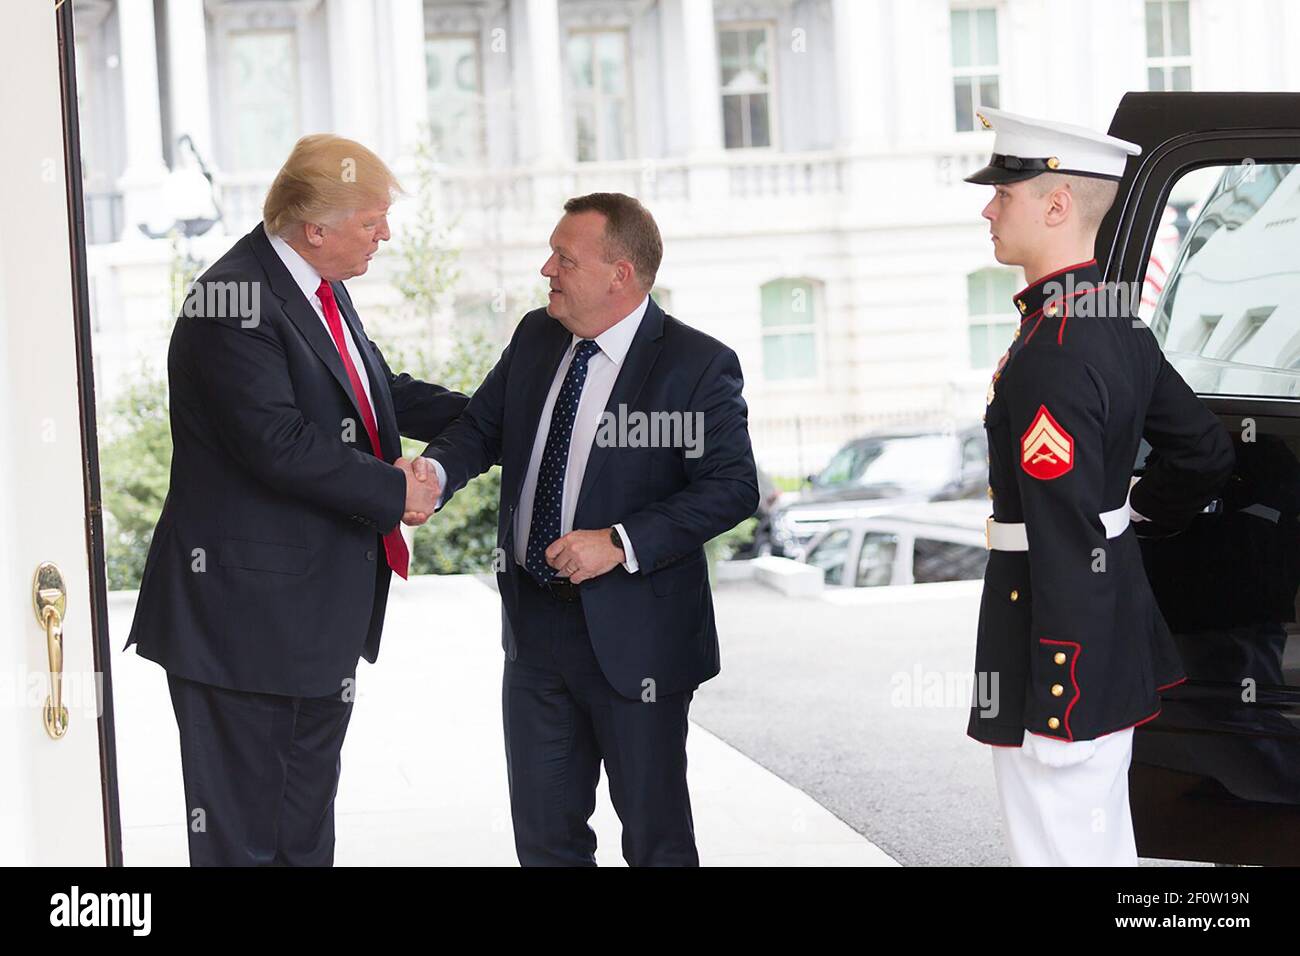 President Donald Trump greets Danish Prime Minister Lars LÃ¸kke Rasmussen in the West Wing entrance of the White House Thursday March 30 2017. Stock Photo